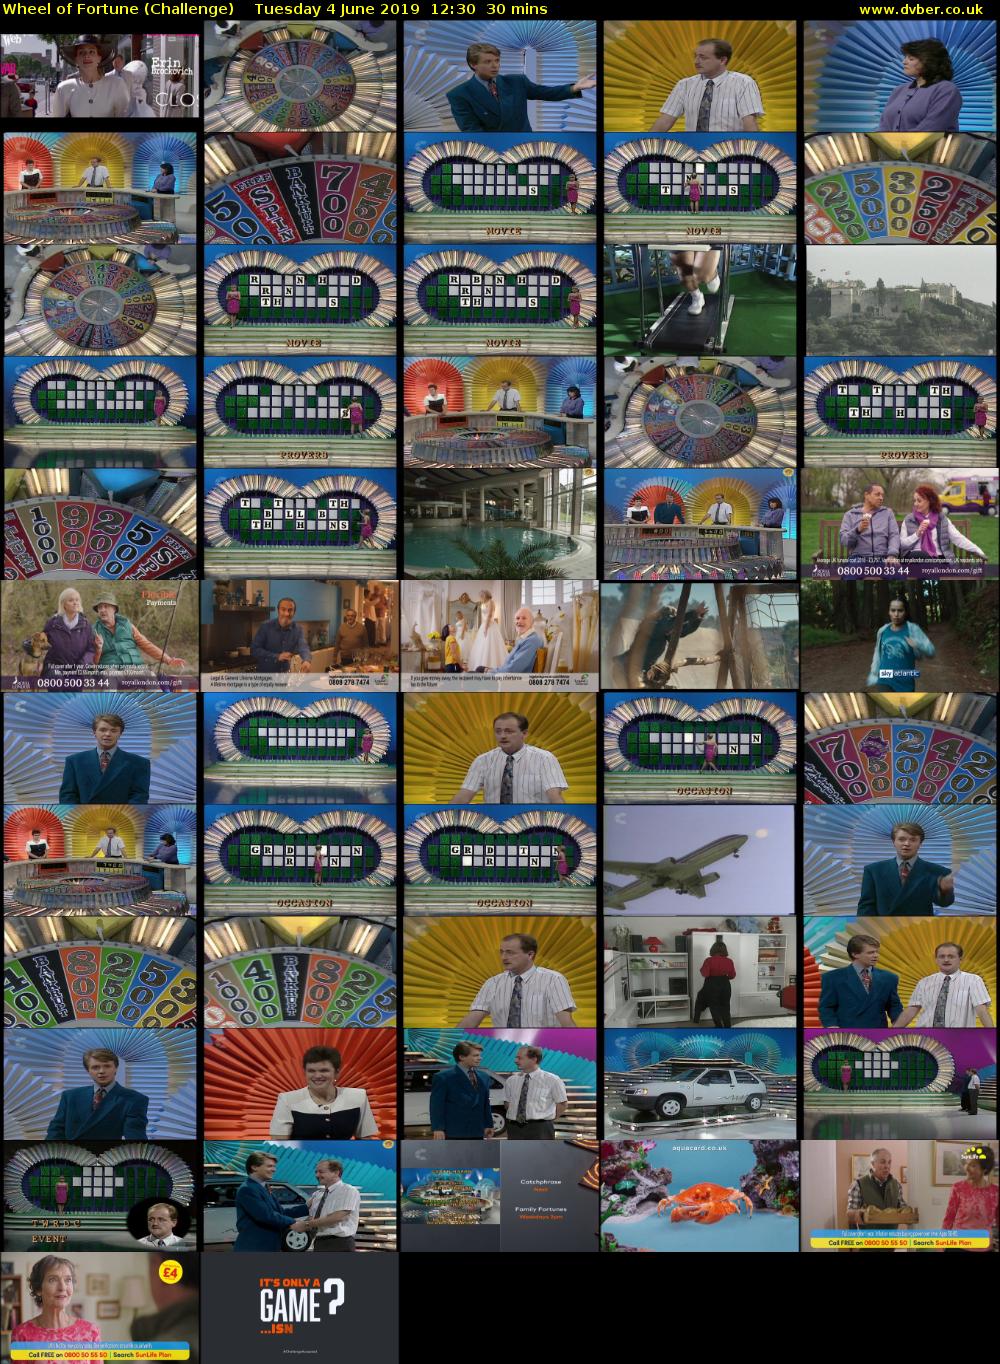 Wheel of Fortune (Challenge) Tuesday 4 June 2019 12:30 - 13:00